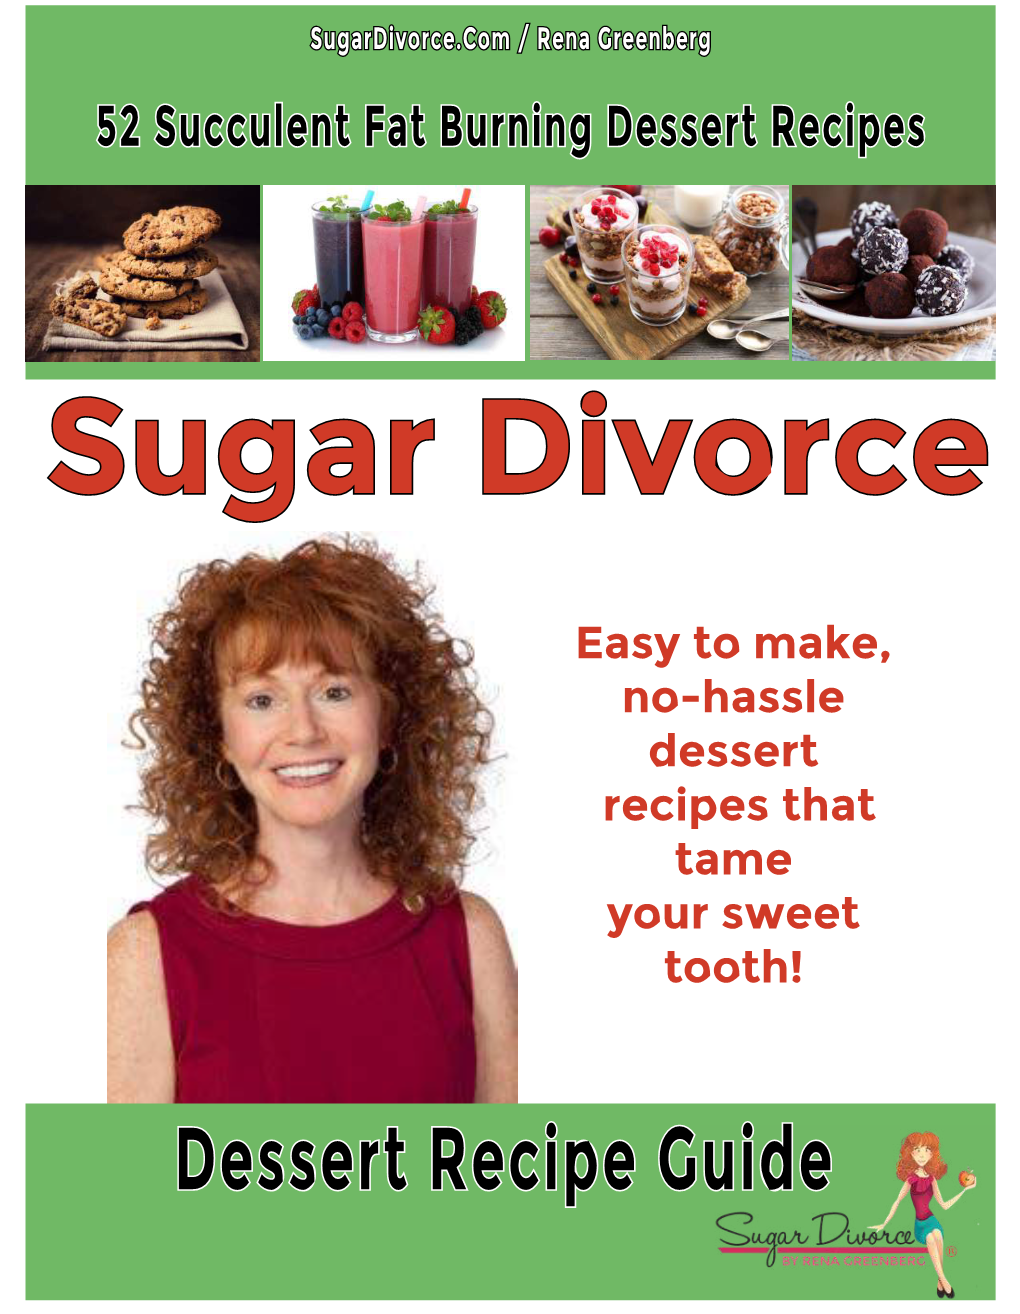 Dessert Recipe Guide Table of Contents